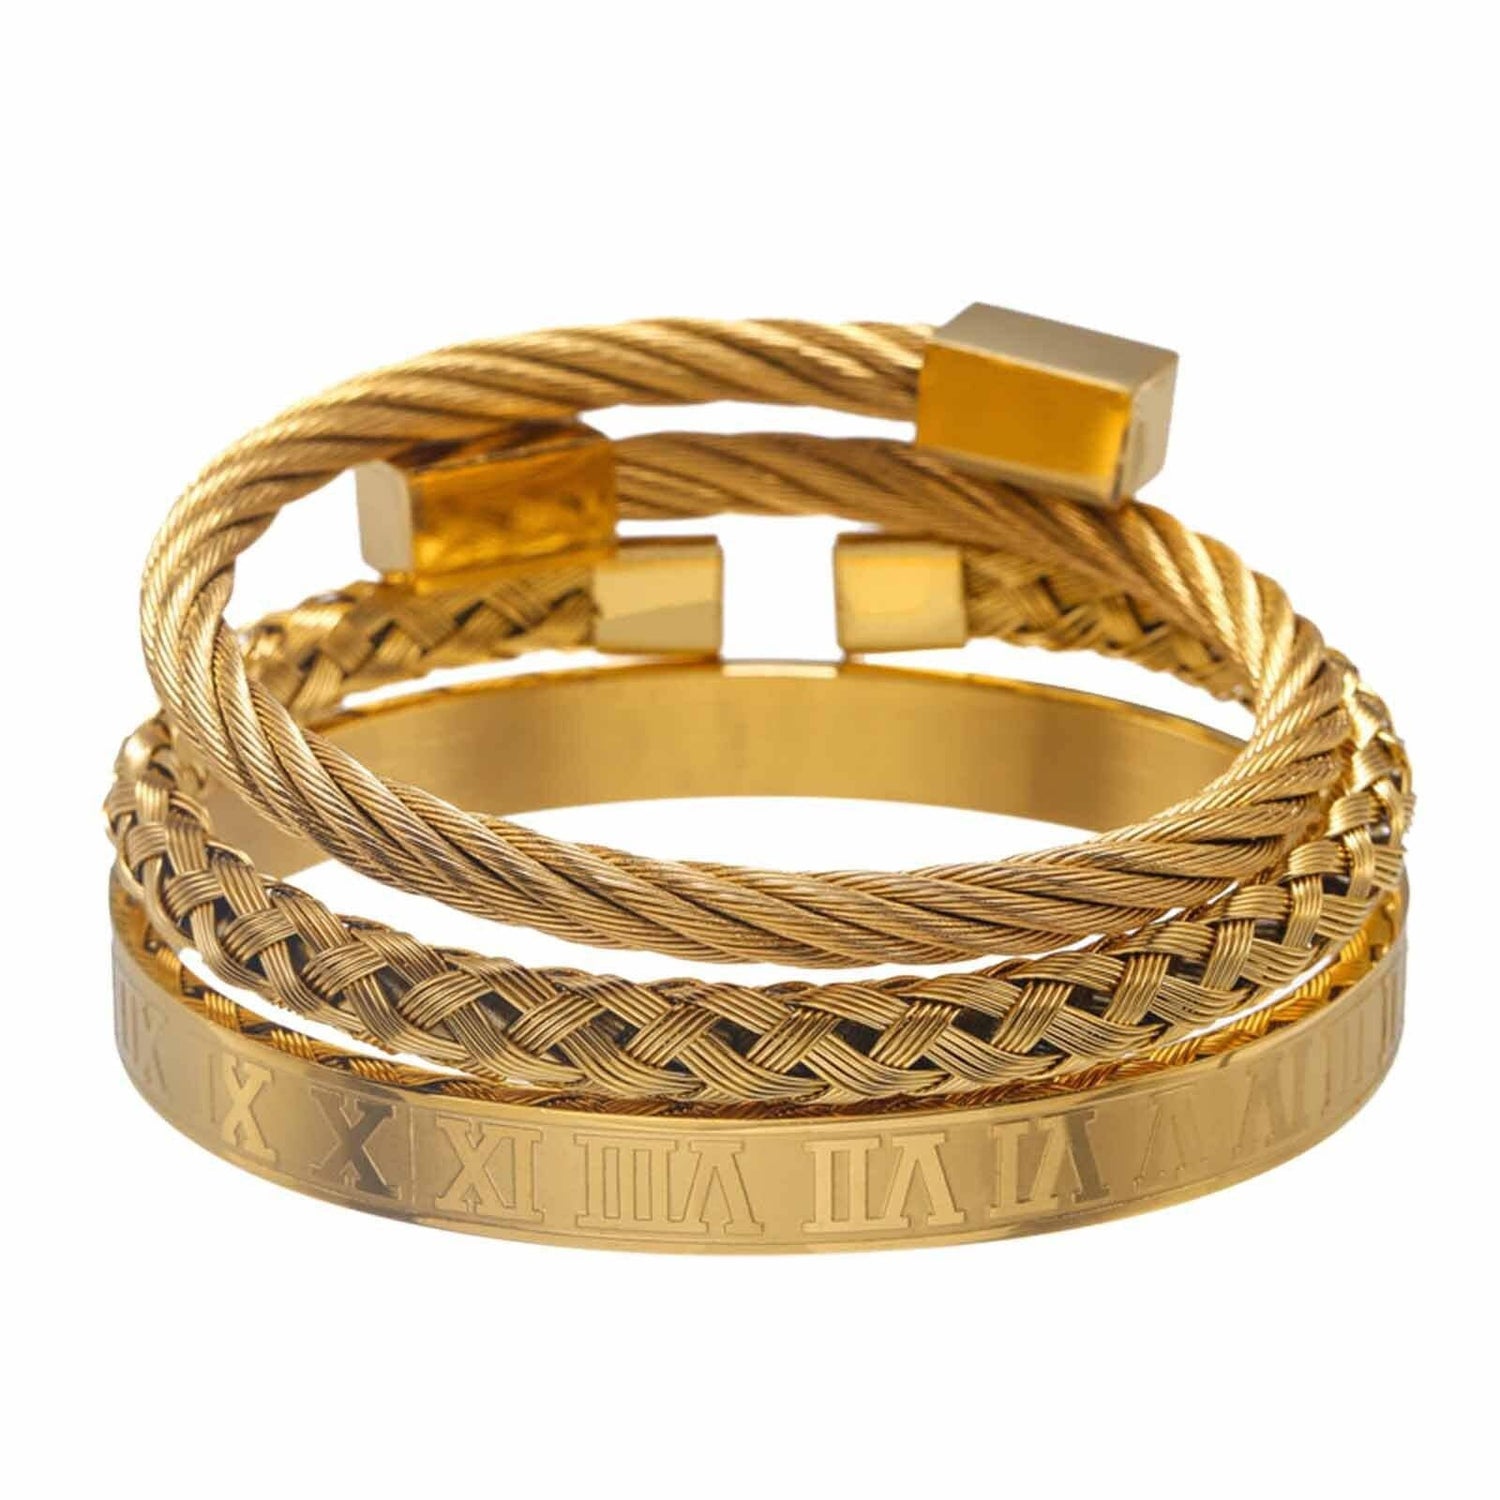 Freddi - Gold Plated Stainless Steel Cuff, Bangle Men's Bracelet With Roman  Numerals 1-12